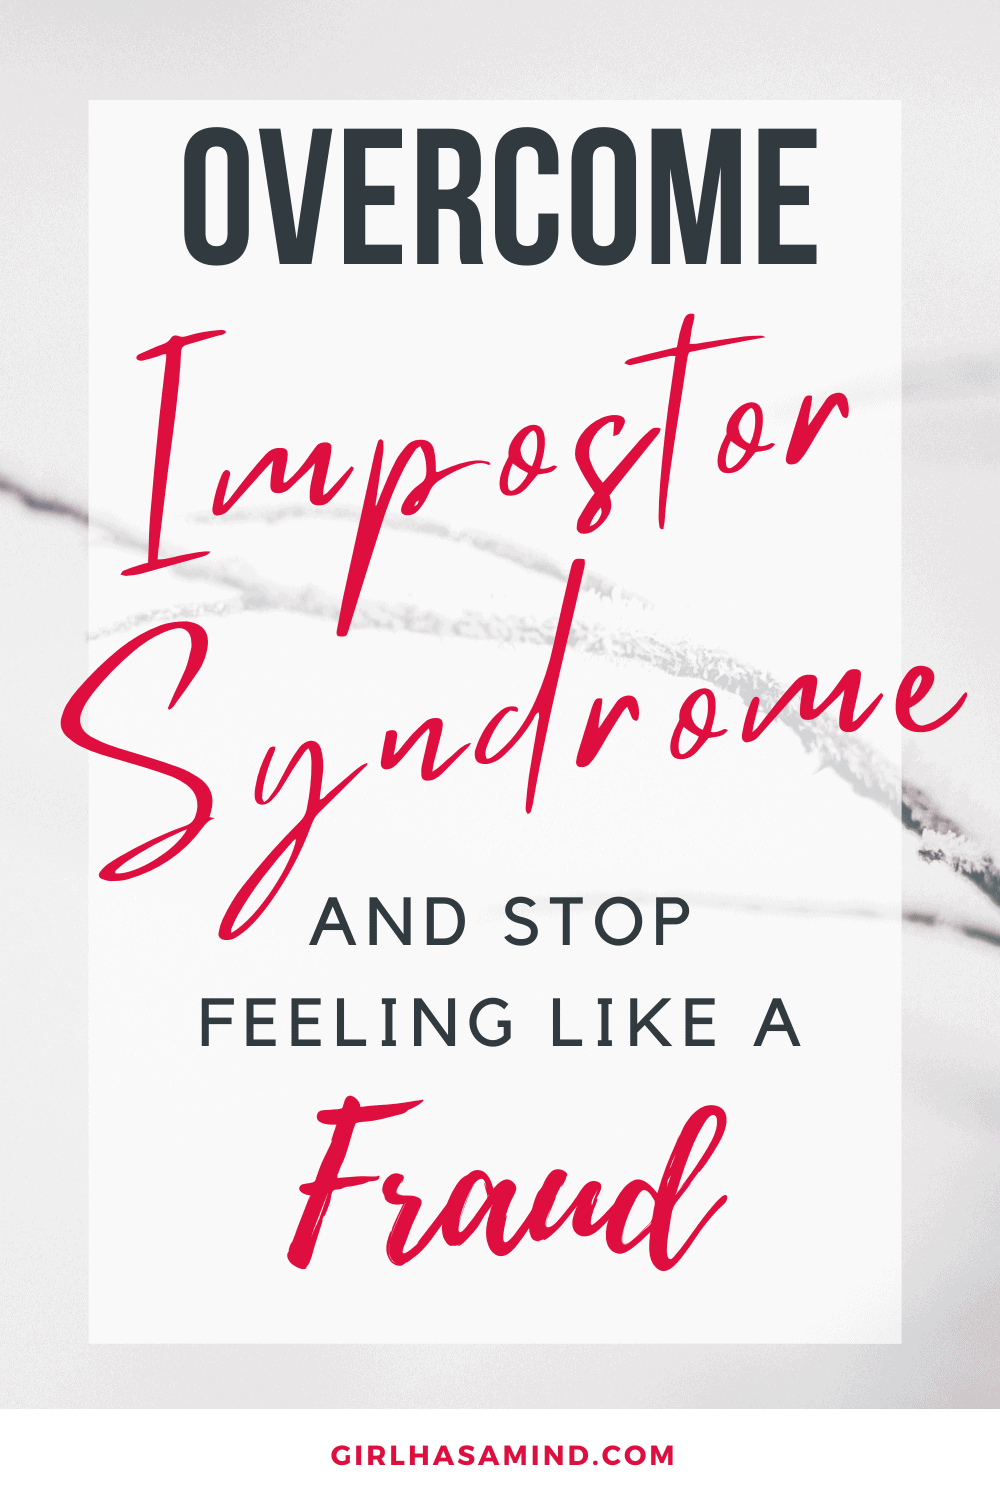 How To Overcome Impostor Syndrome And Stop Feeling Like A Fraud